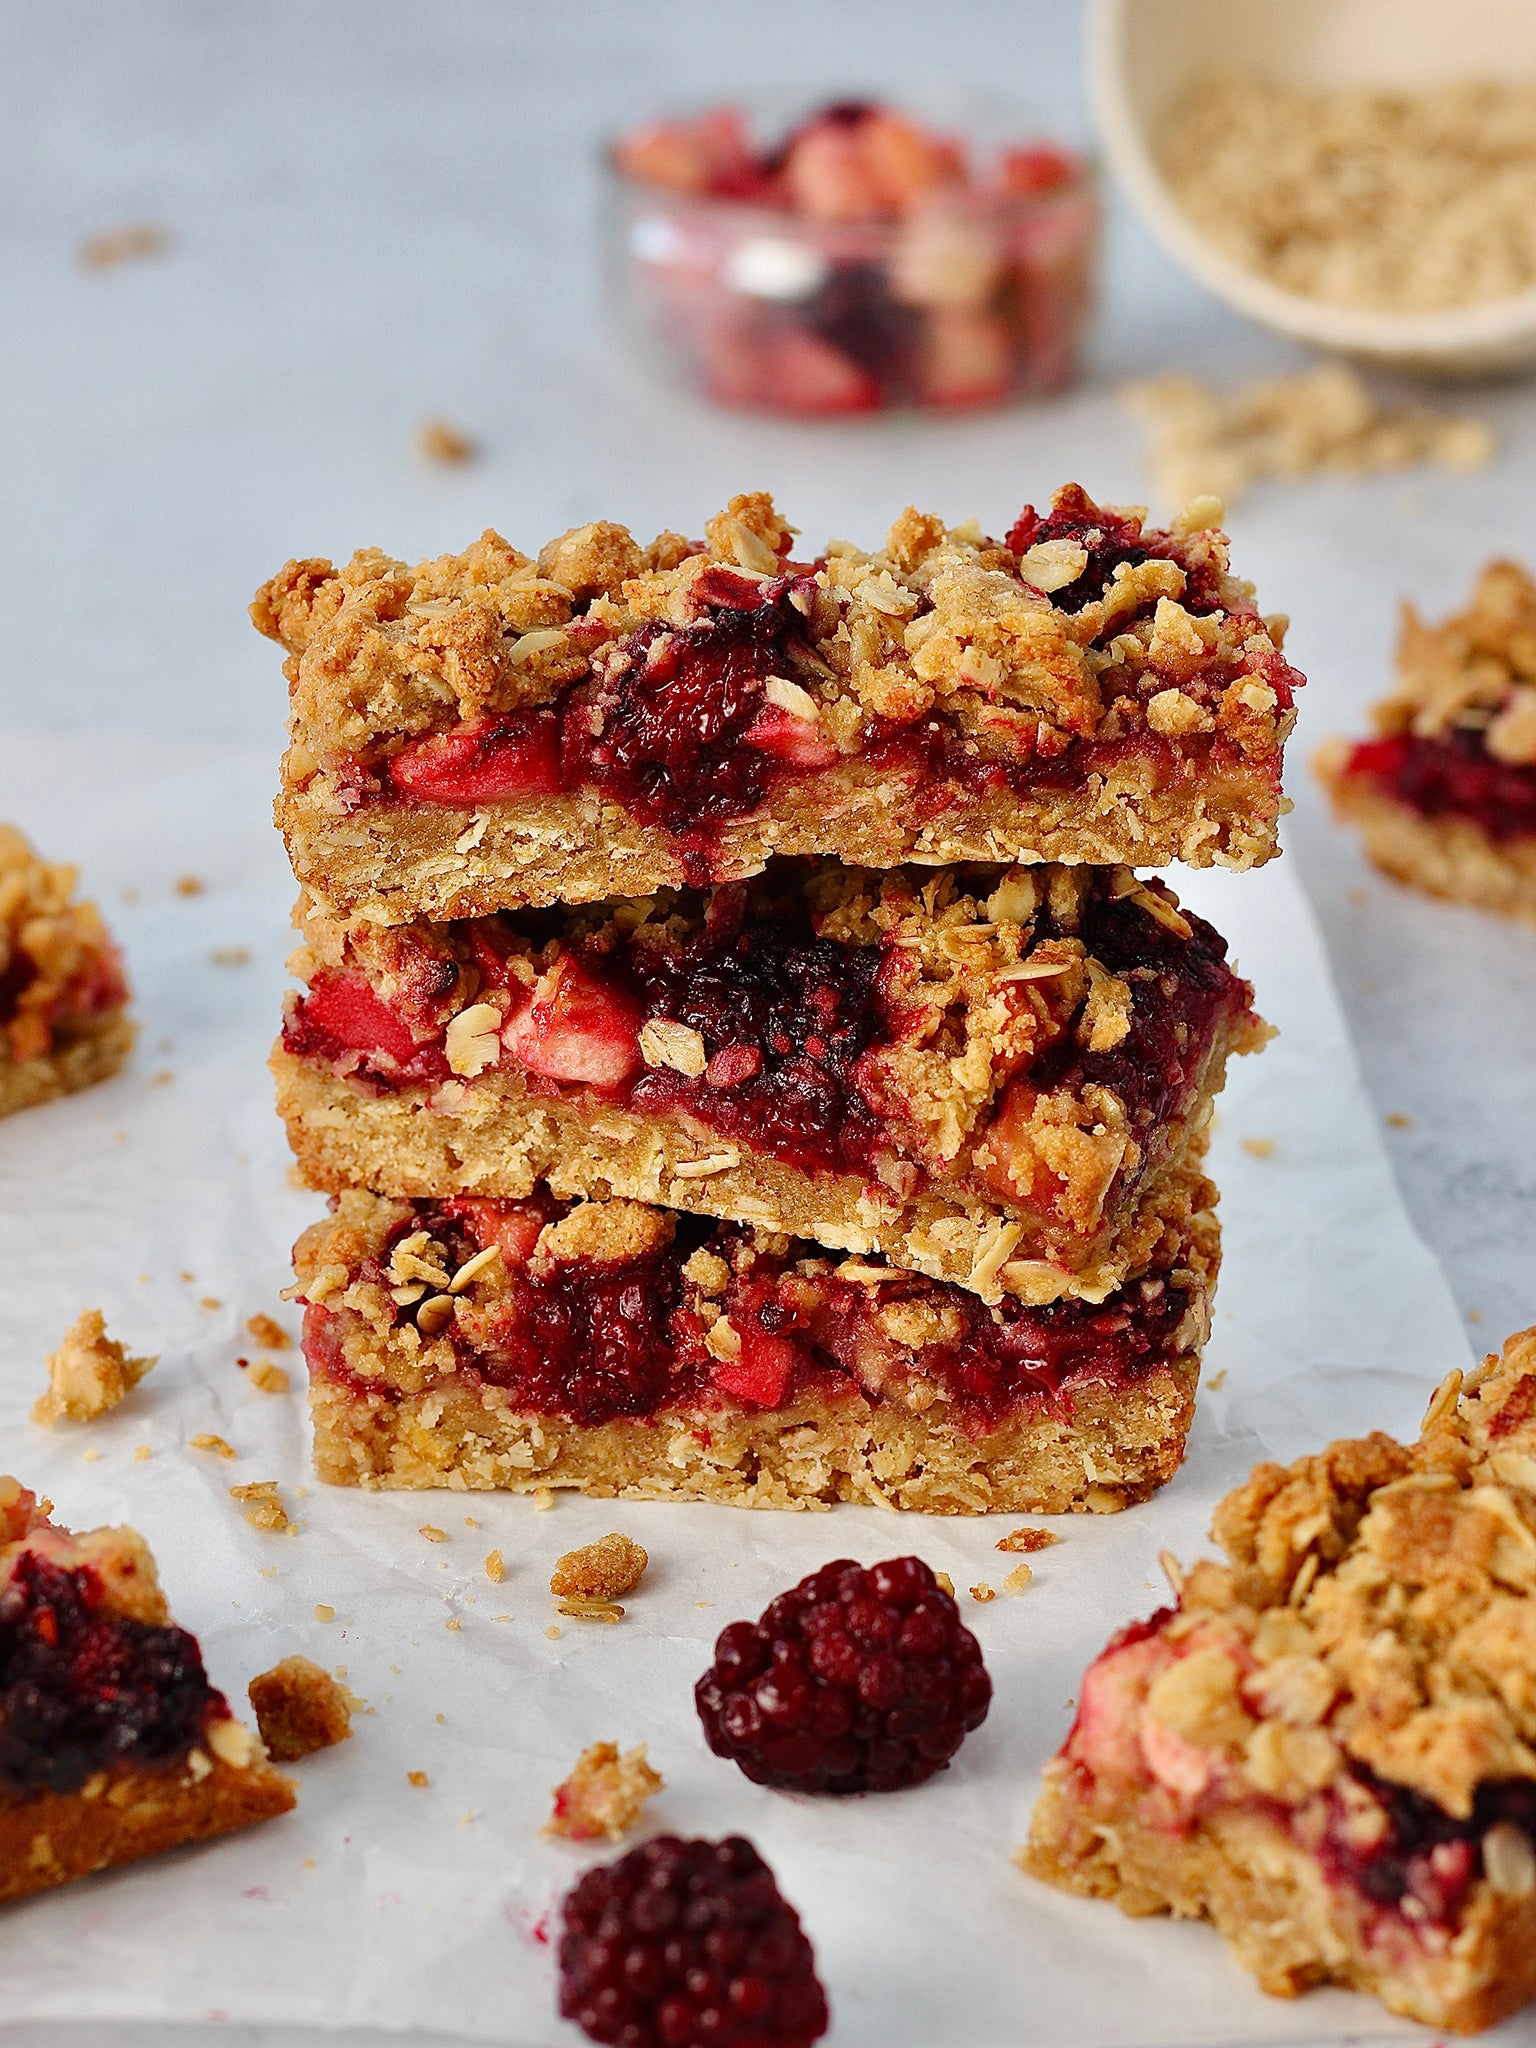 These apple and blackberry crumble bars are perfect for breakfast on the go